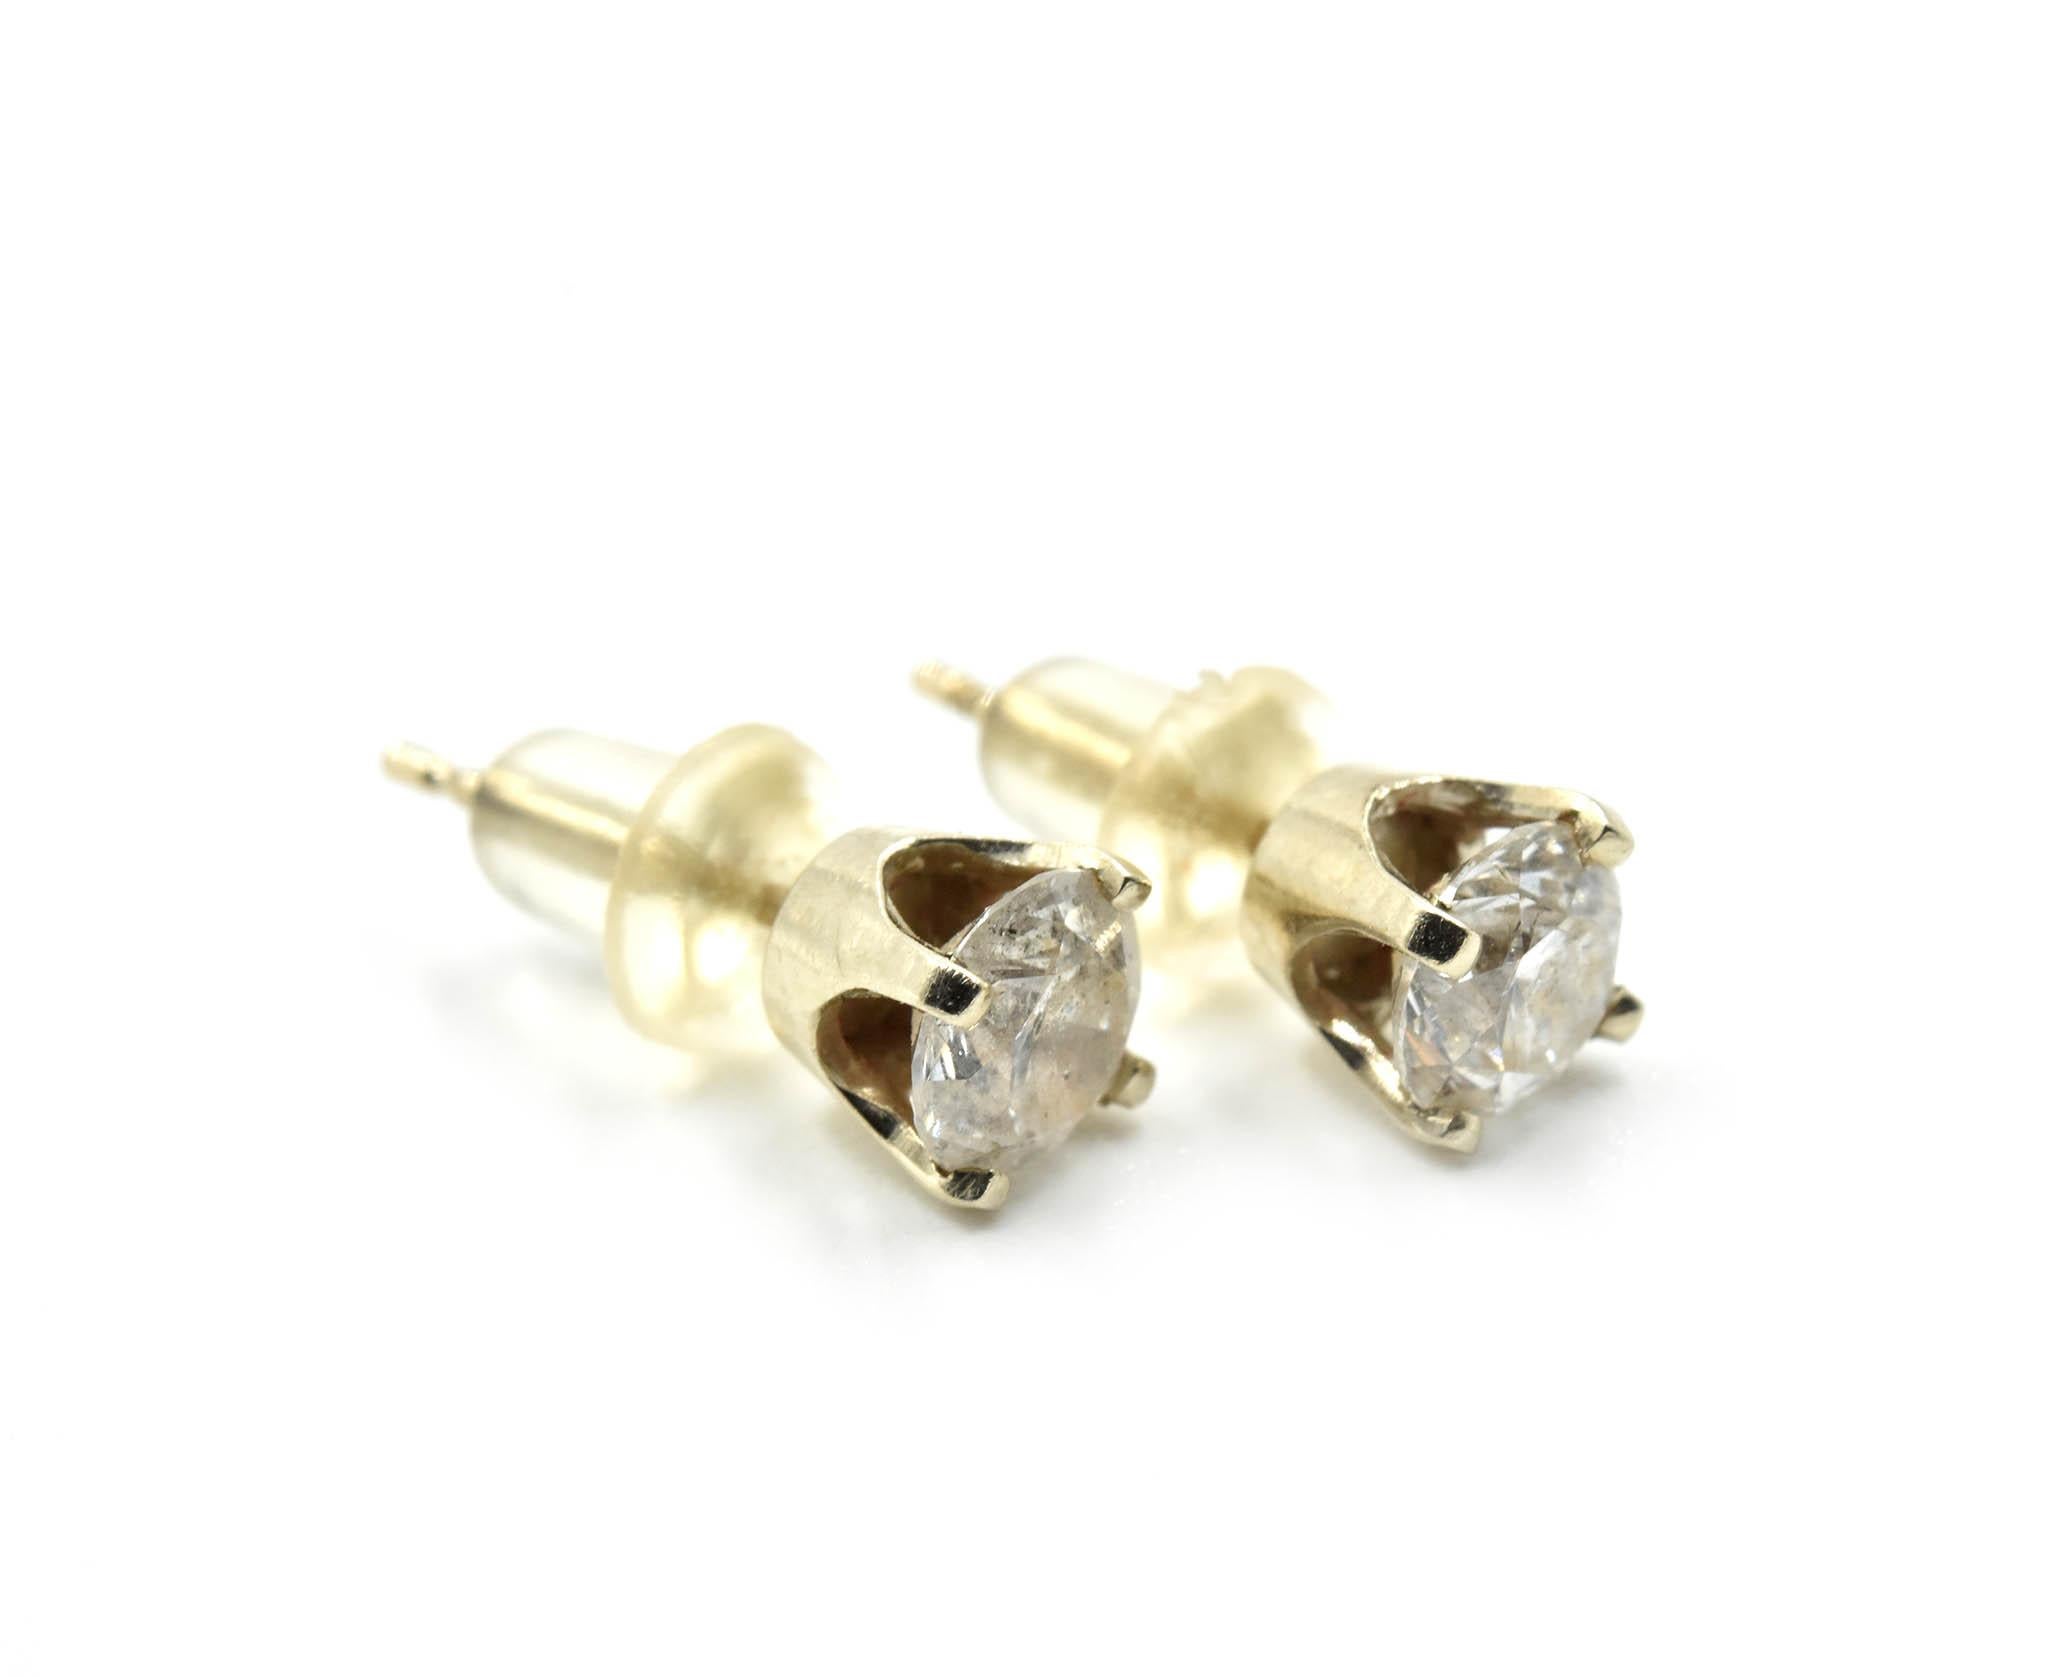 Designer: custom design
Material: 14k yellow gold
Diamonds: two round brilliant cuts = 0.66 carat total weight
Fastenings: friction backs
Dimensions: each earring measures 4.60mm in diameter
Weight: 0.83 grams
